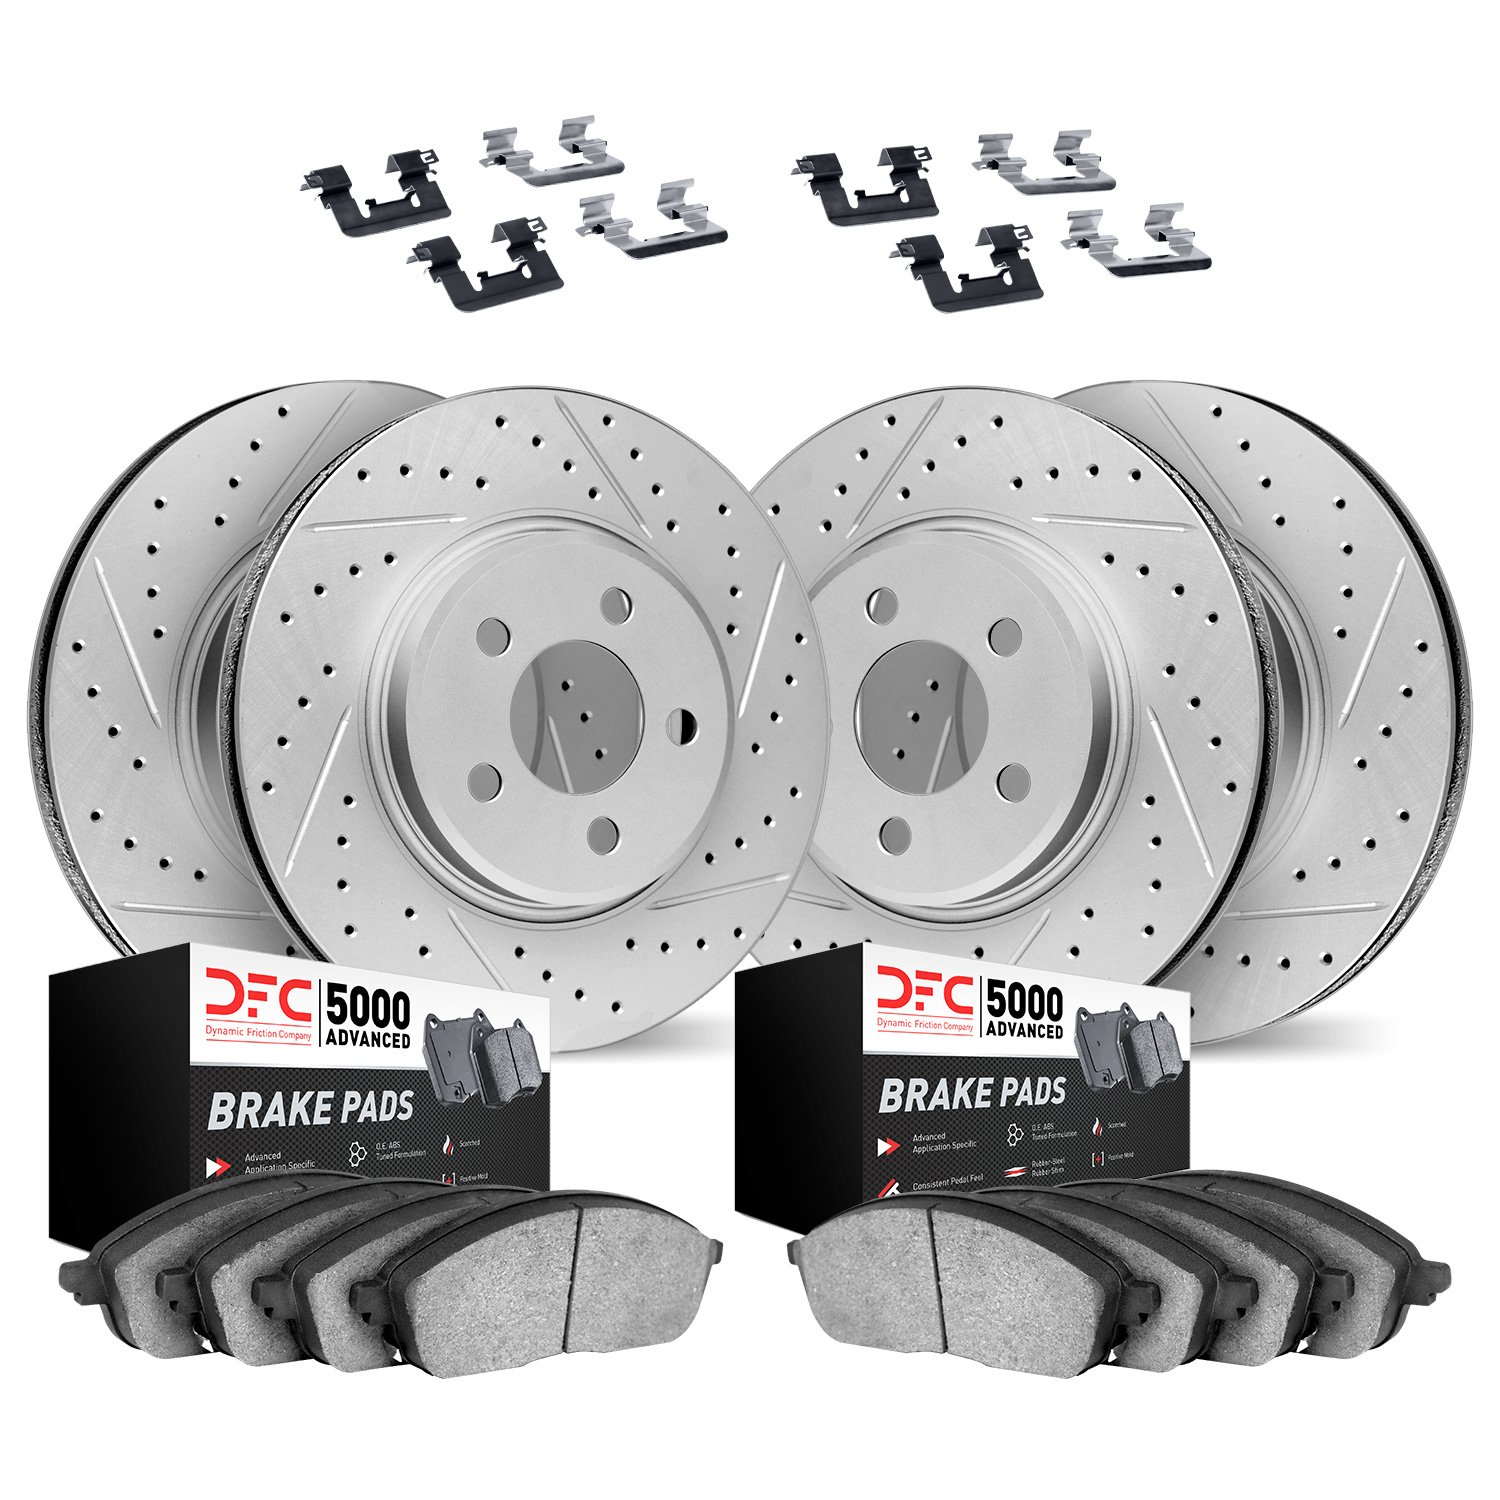 2514-11009 Geoperformance Drilled/Slotted Rotors w/5000 Advanced Brake Pads Kit & Hardware, 2005-2007 Land Rover, Position: Fron